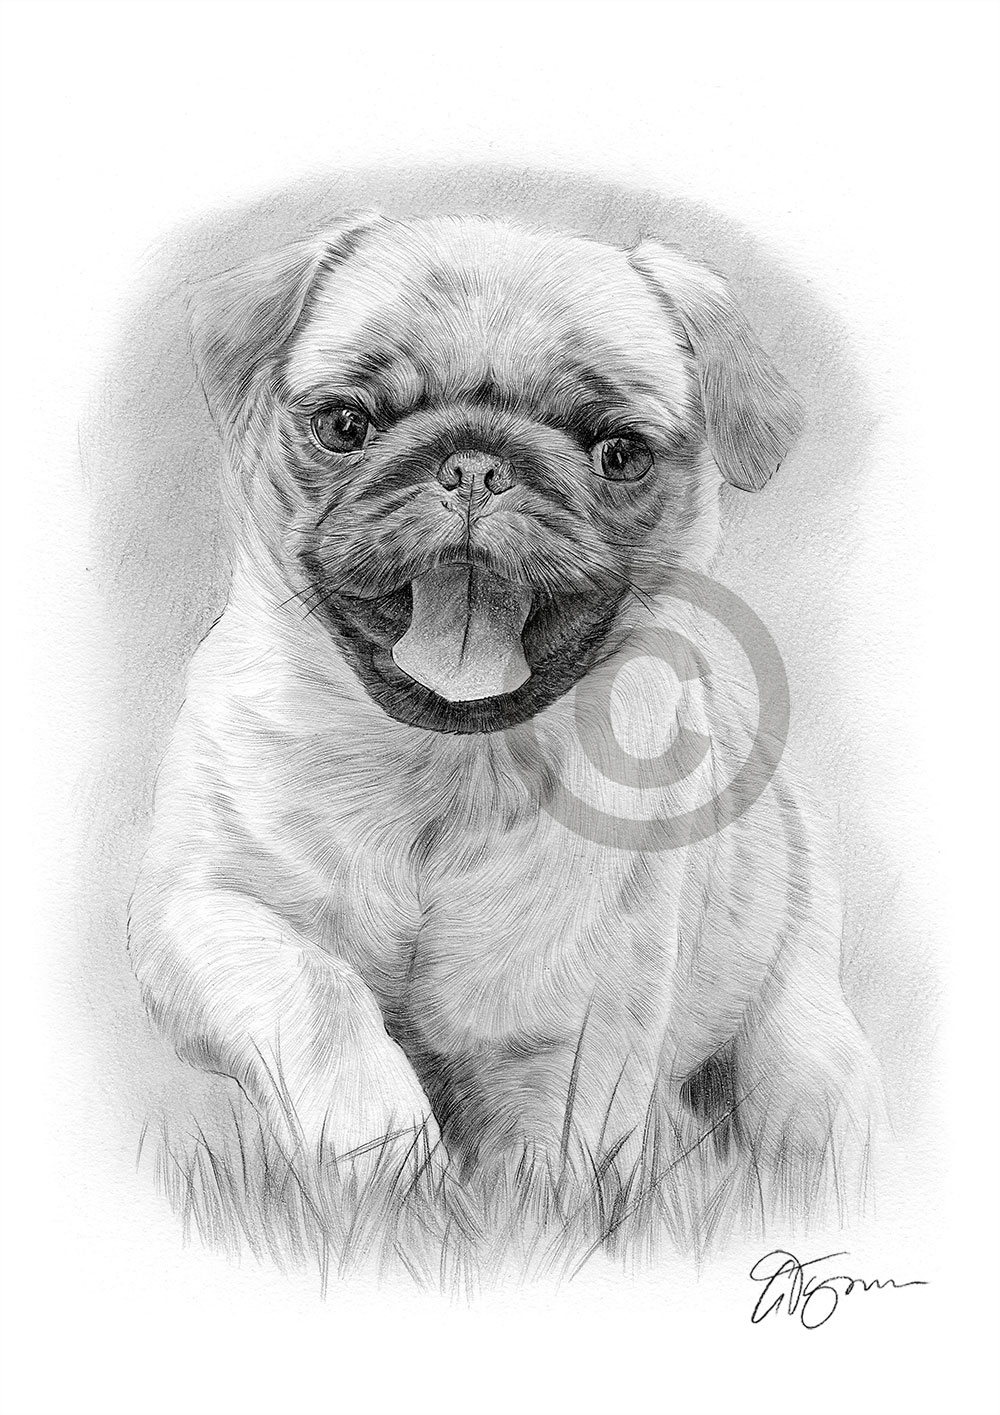 Pencil drawing of a Pug puppy running by artist Gary Tymon